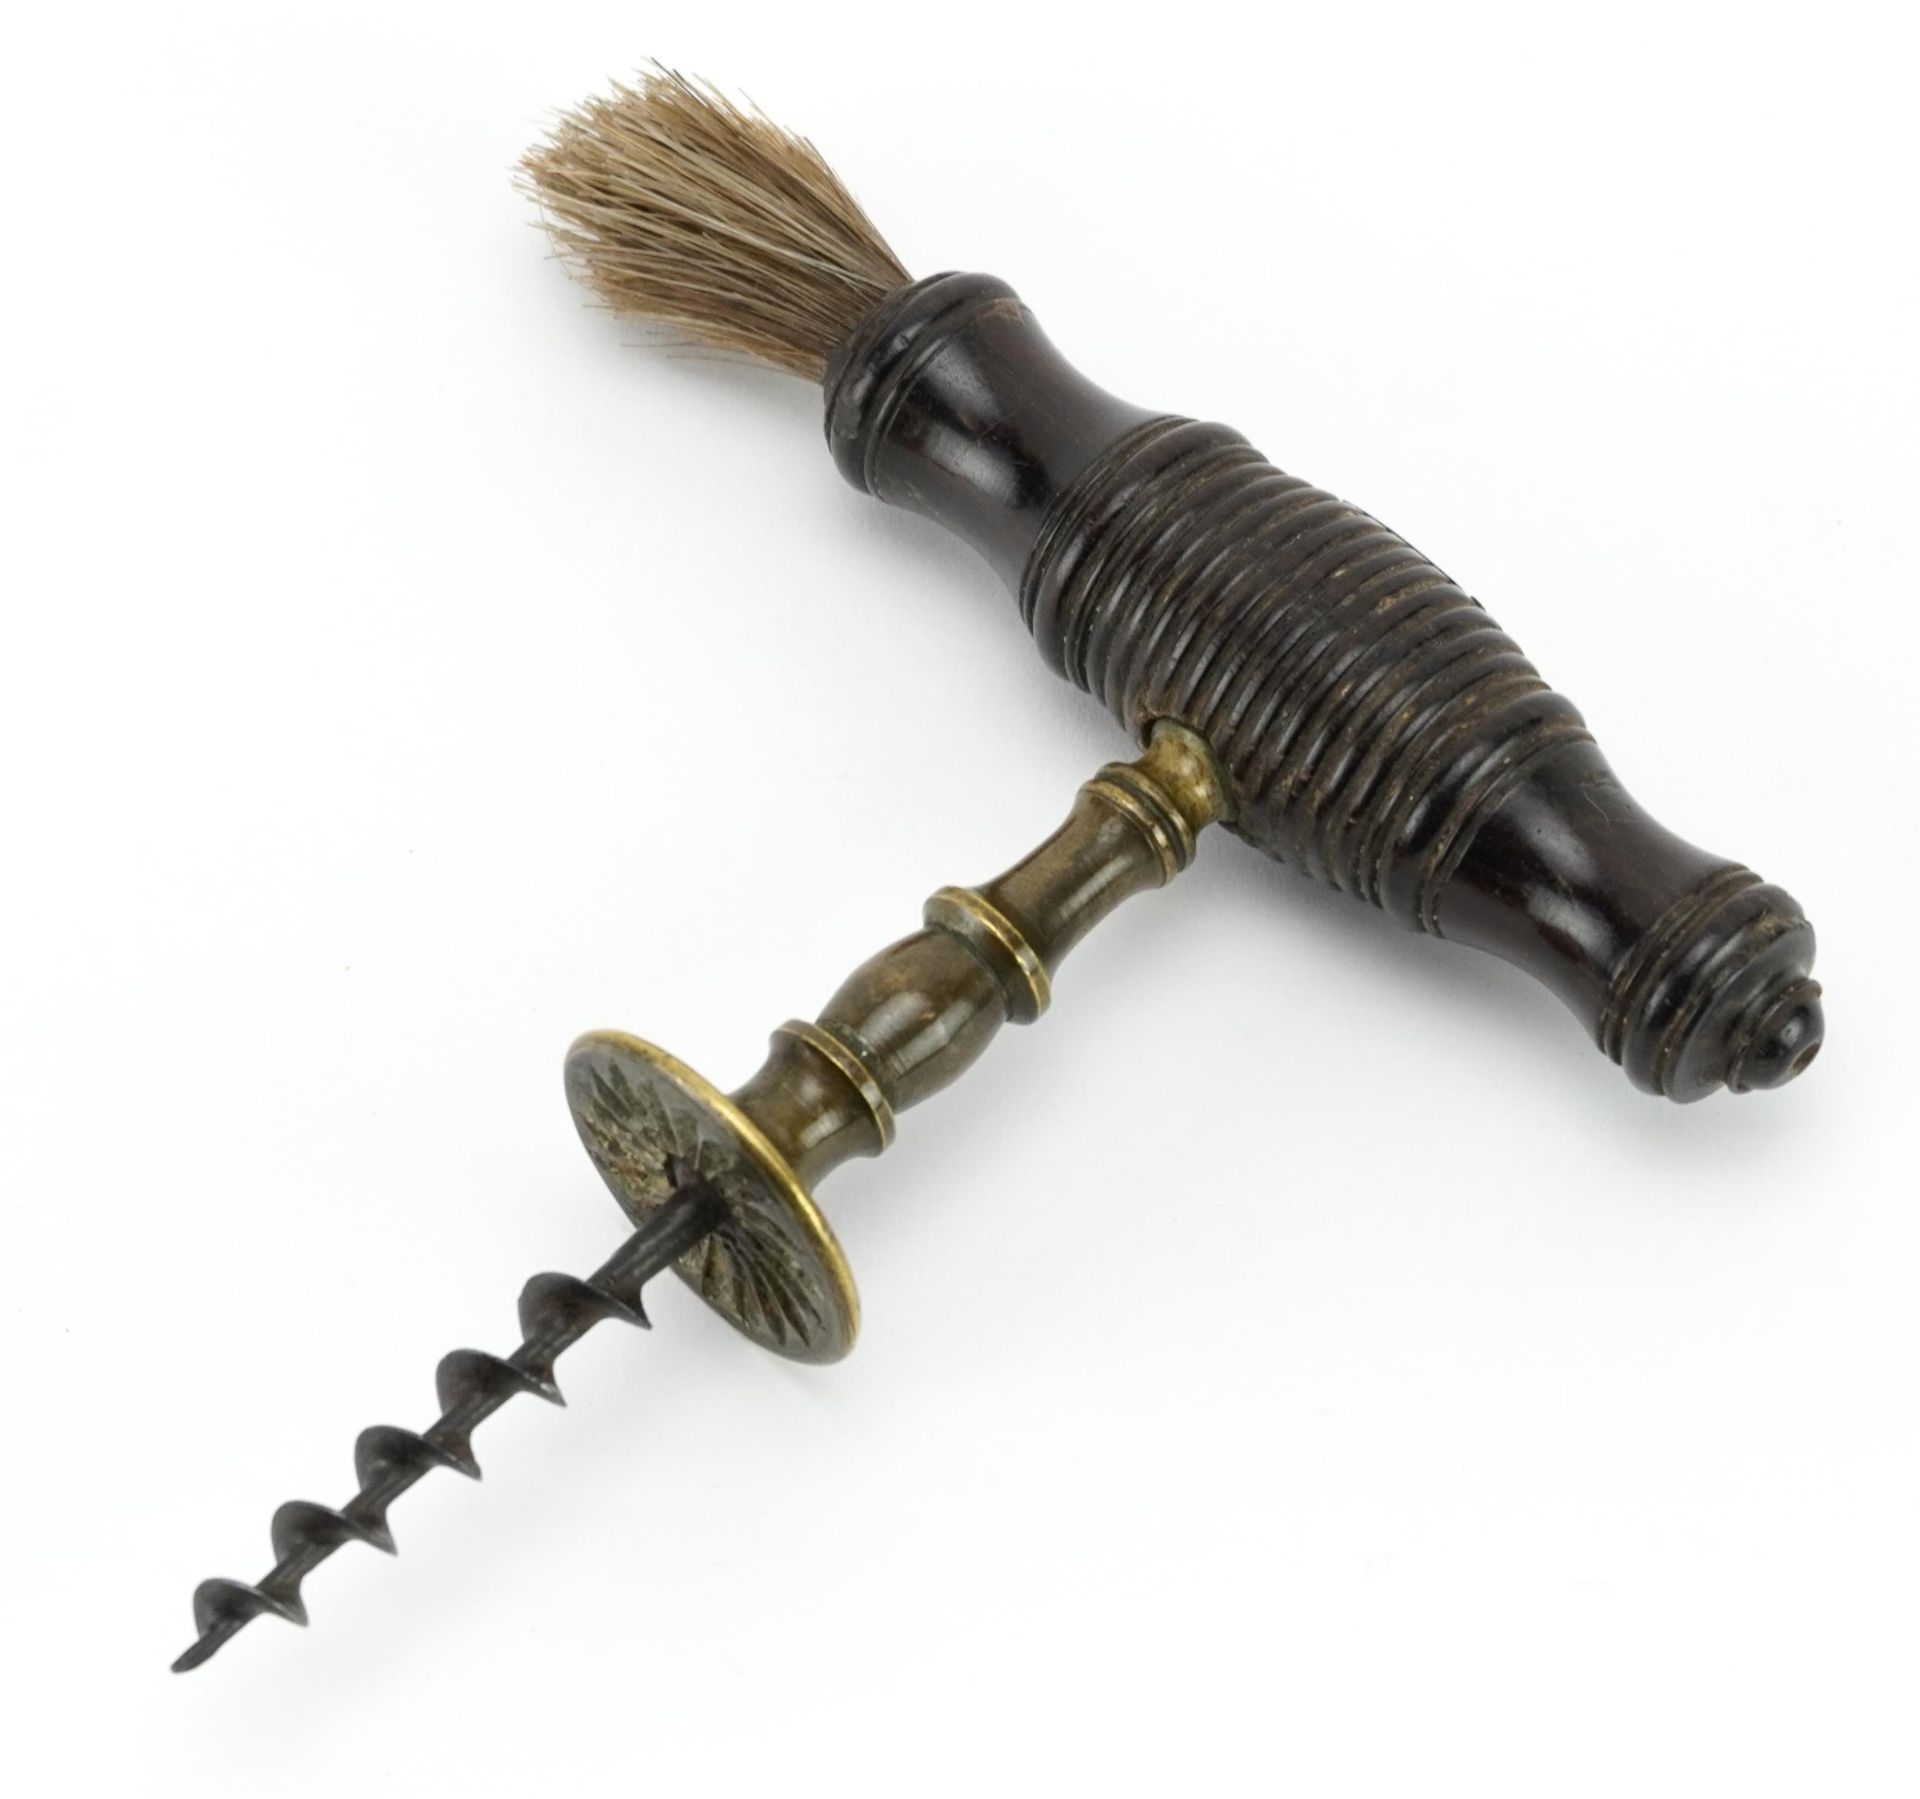 19th century Henshall type brass corkscrew with turned wood handle and side brush, impressed